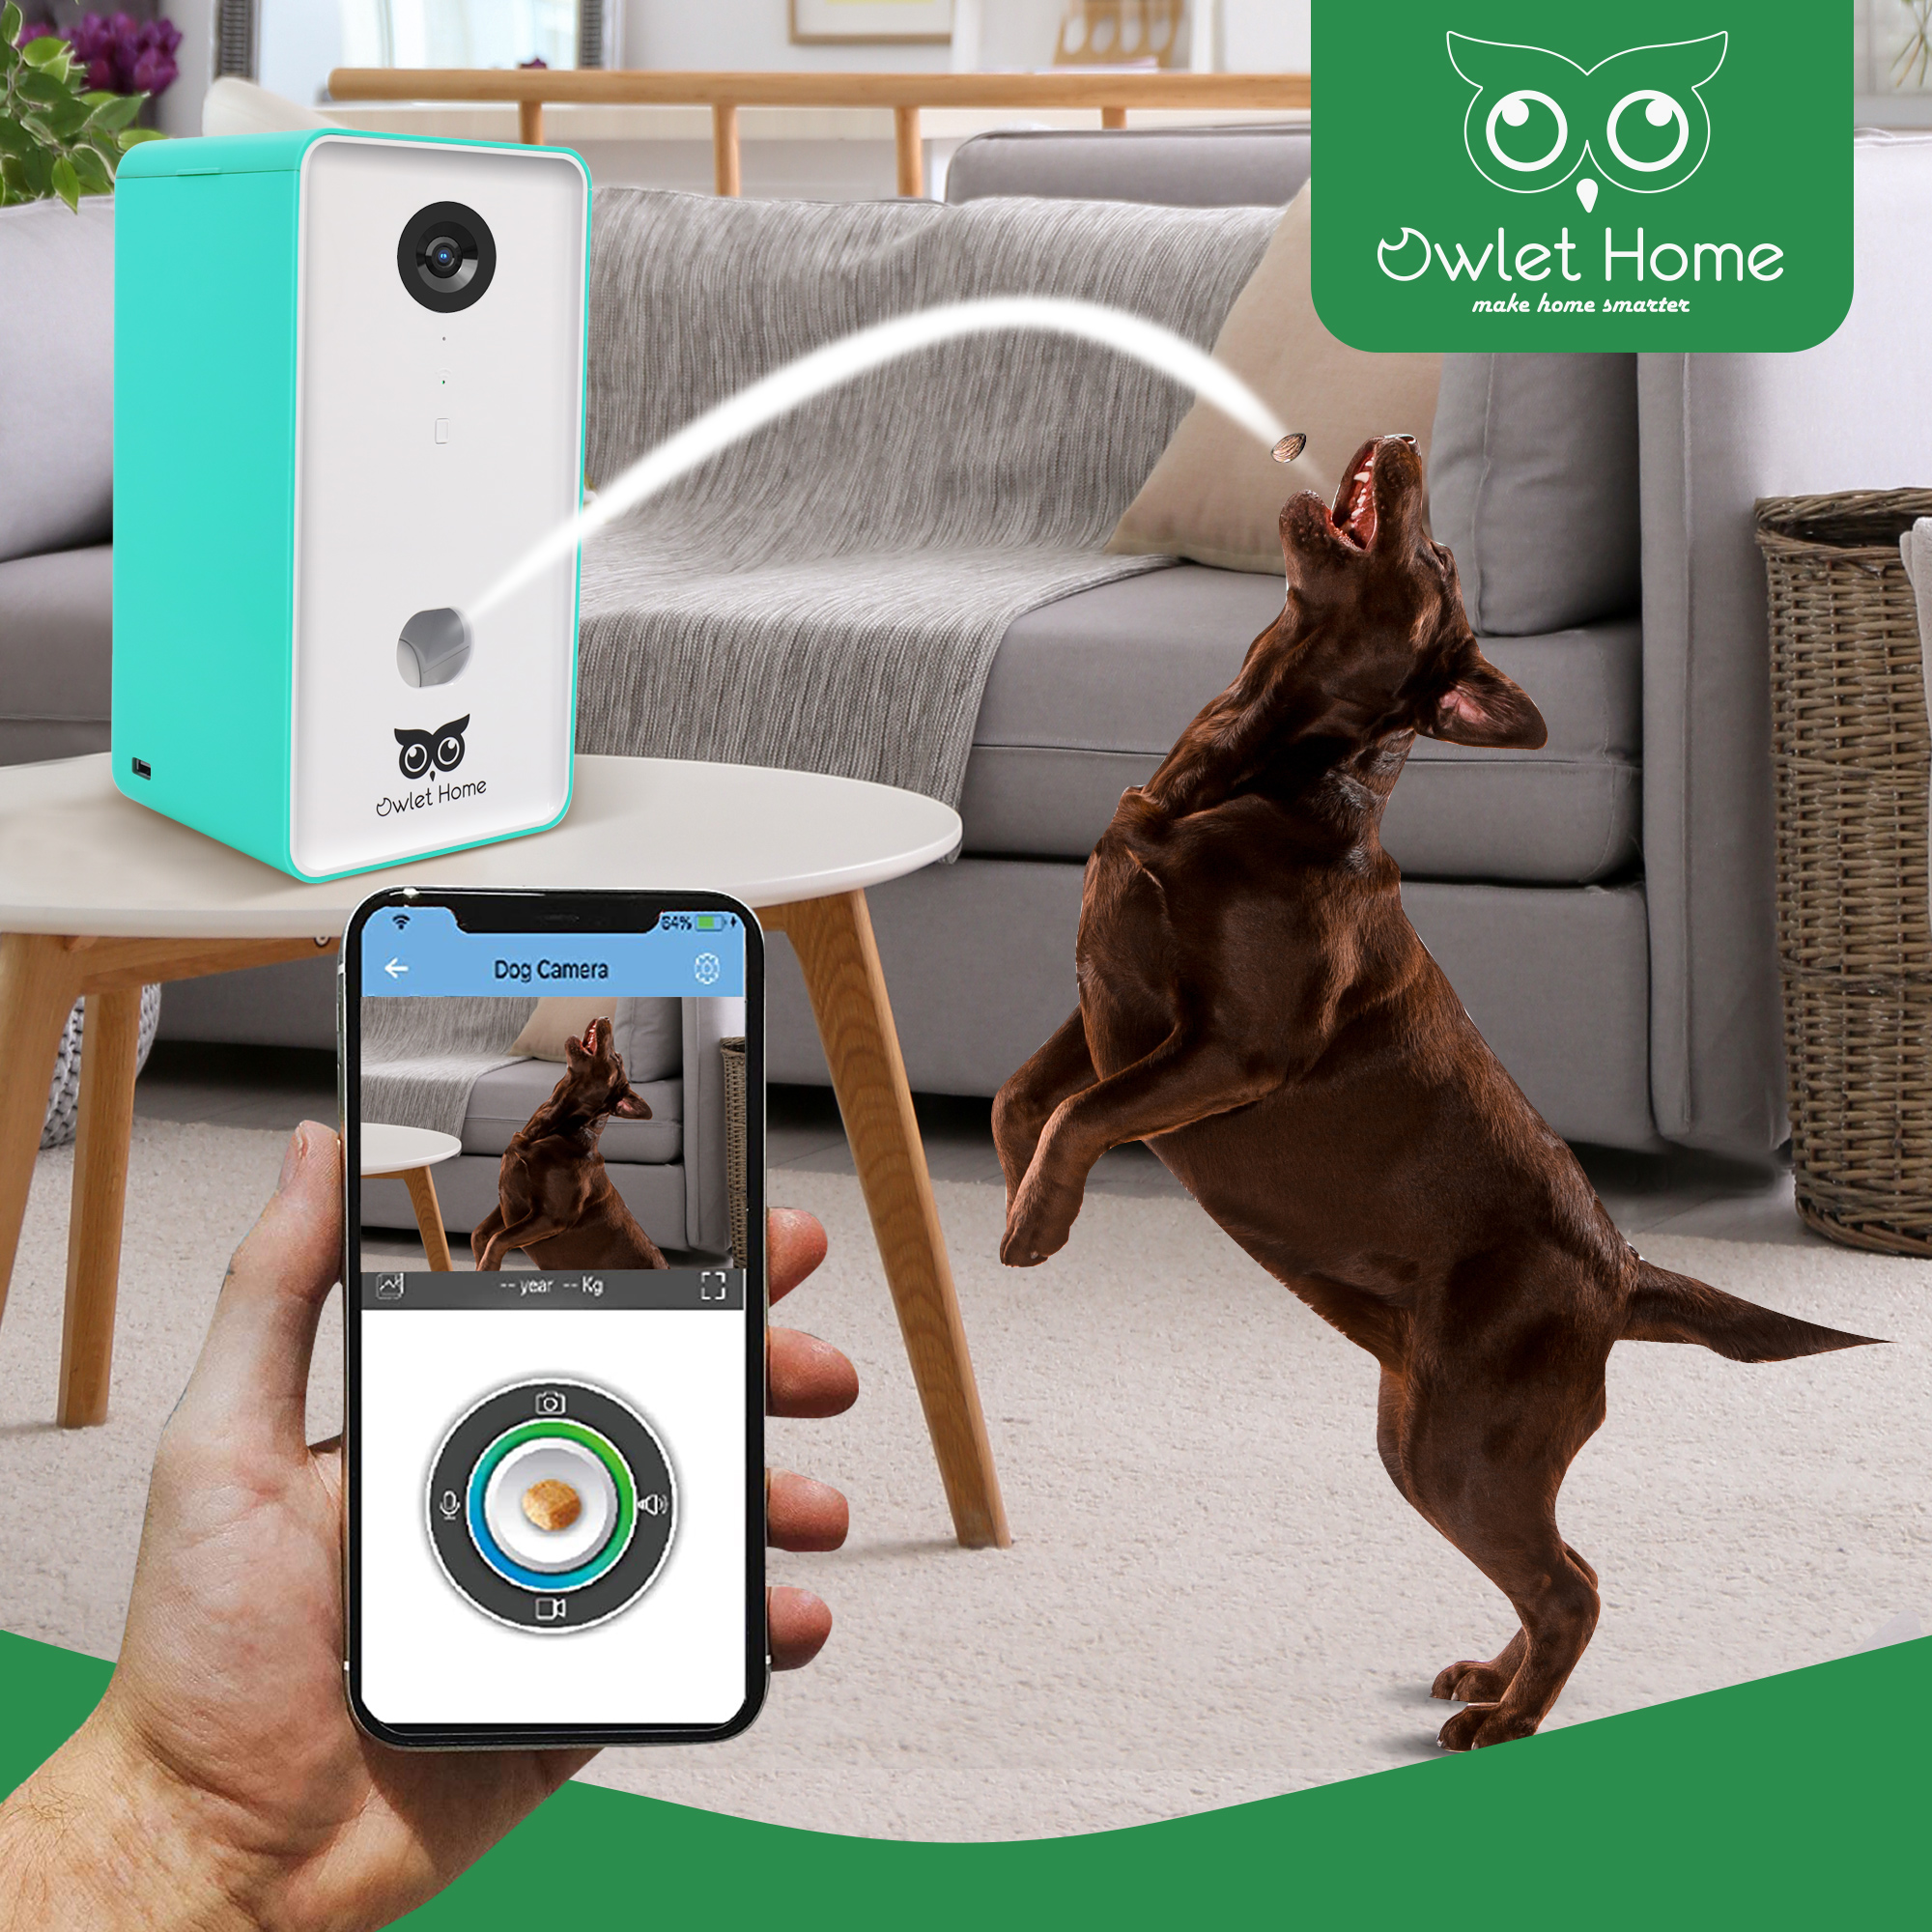 Owlet Home Smart Dog Camera with treat tossing (BLUE), WiFi connecting(2.4G  & 5G), 1080p HD Camera, Live Video Streaming, Auto Night Vision, 2-Way  Audio, Work With Alexa - Owlet Home - Smart